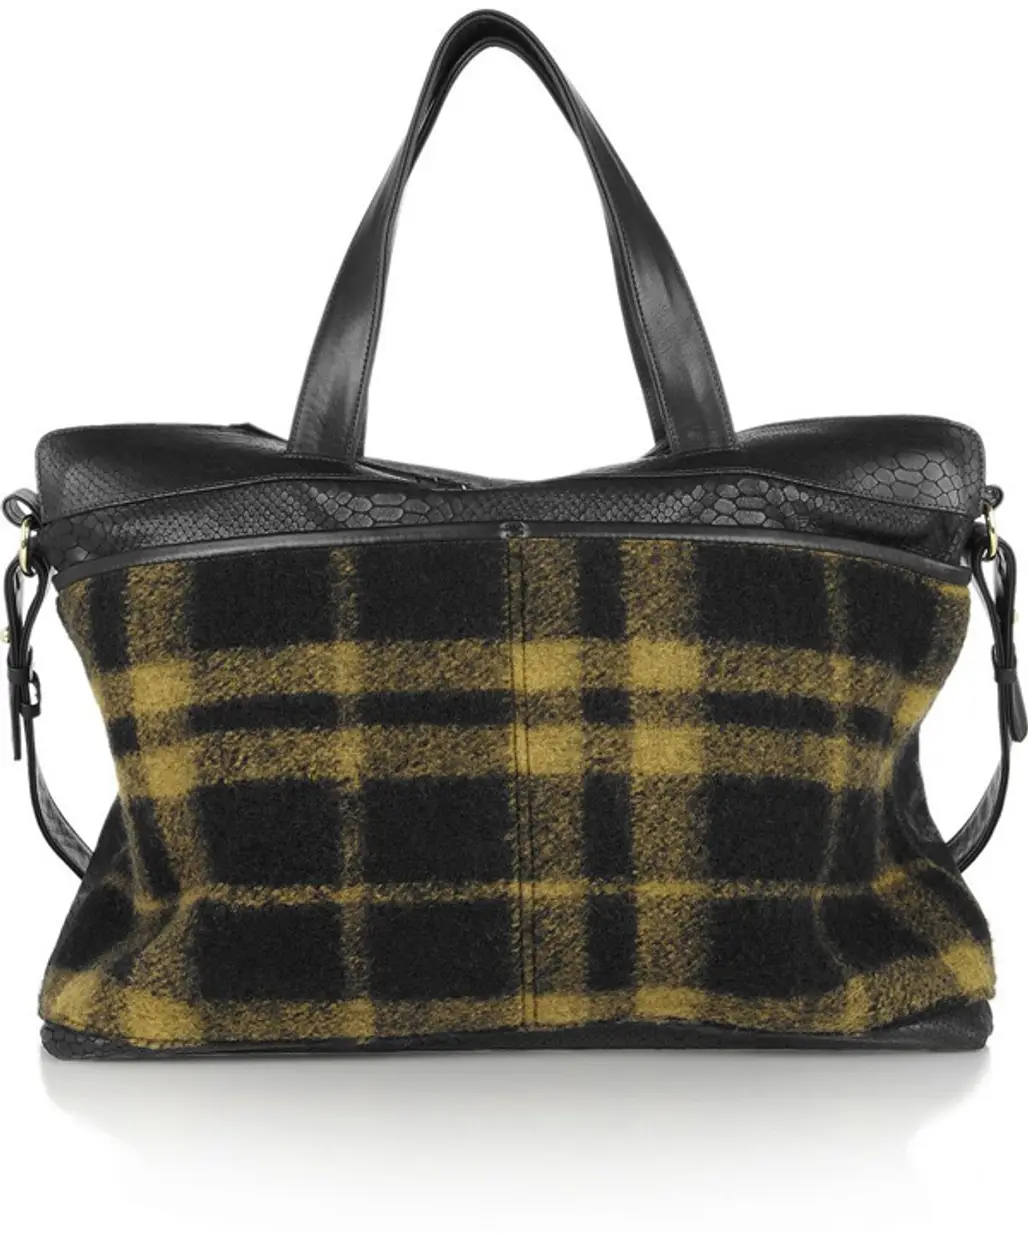 Subtle Yellow Equestrian Style Bags